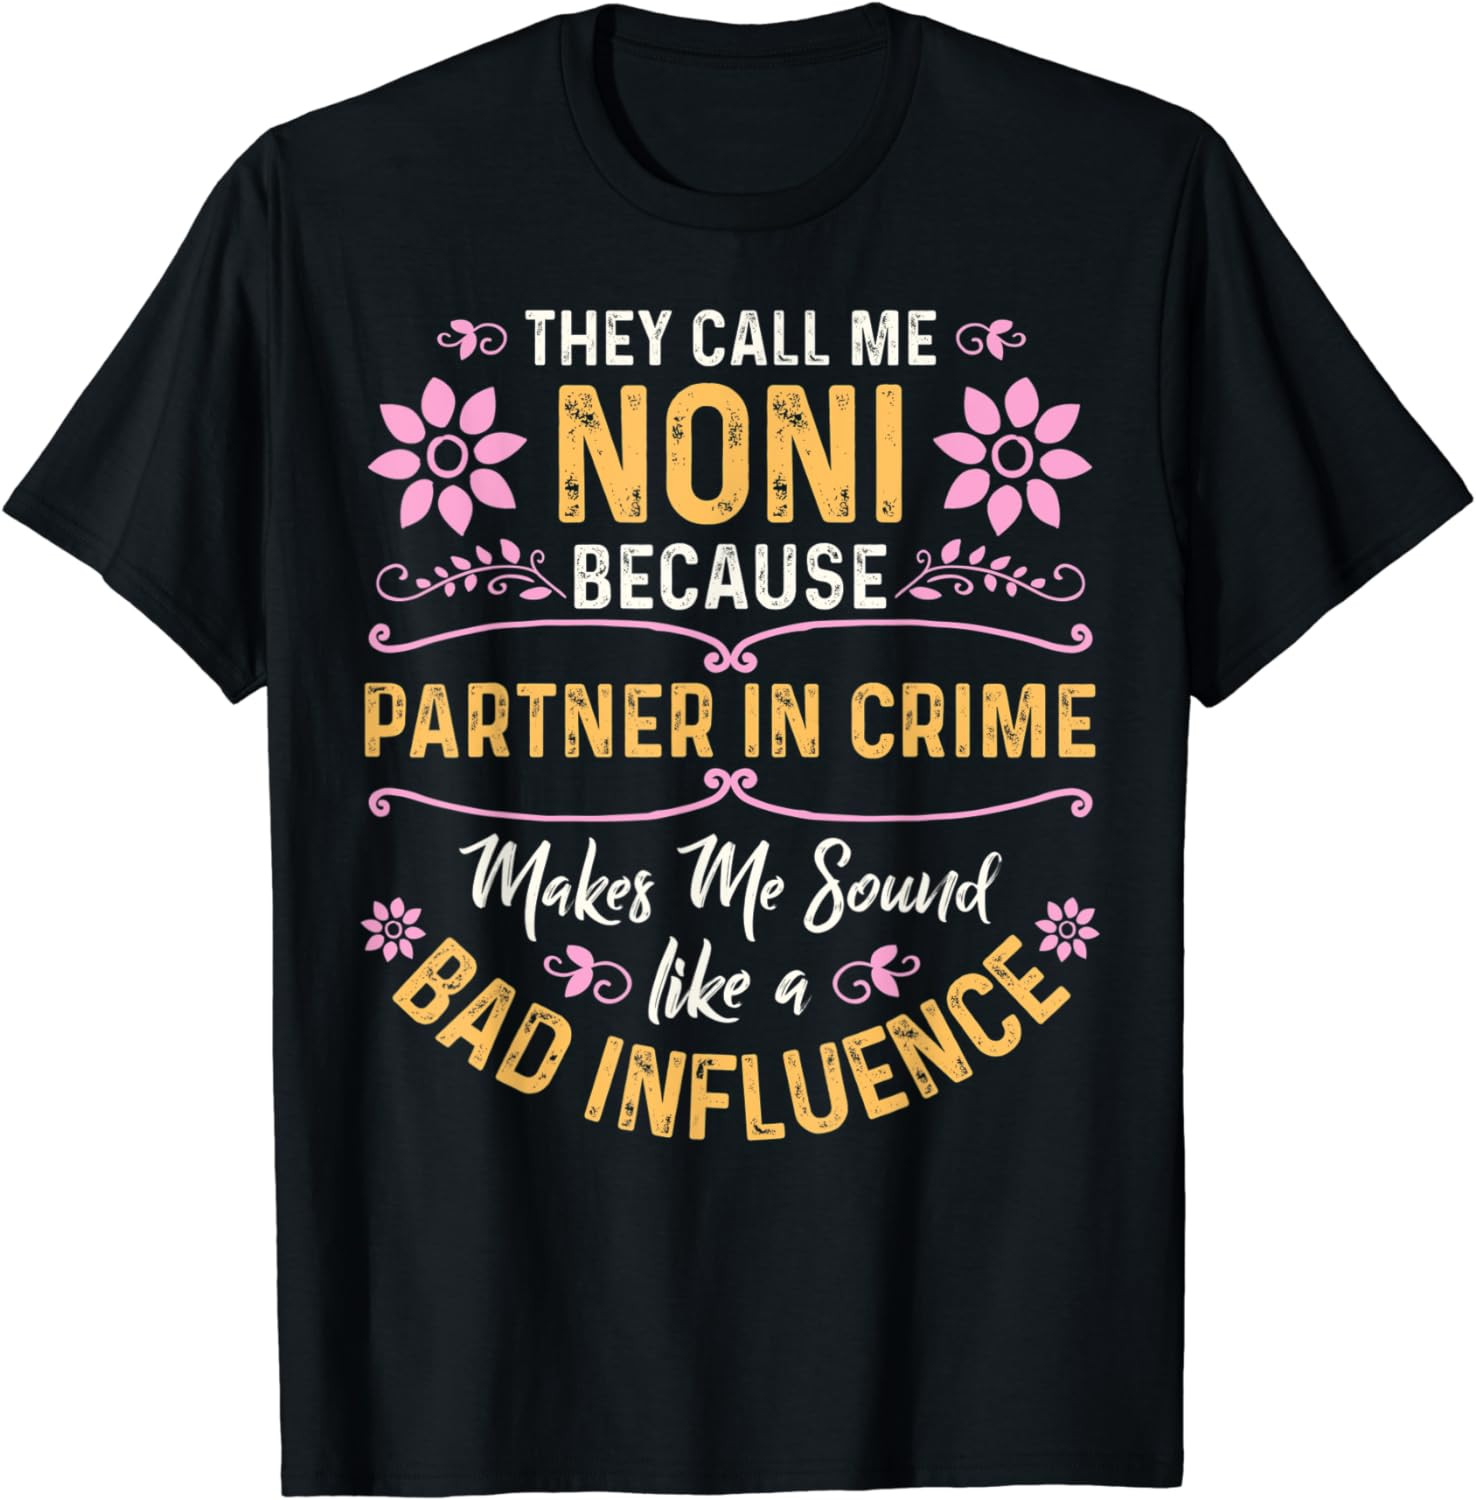 They Call Me Noni Because Partner In Crime T-Shirt